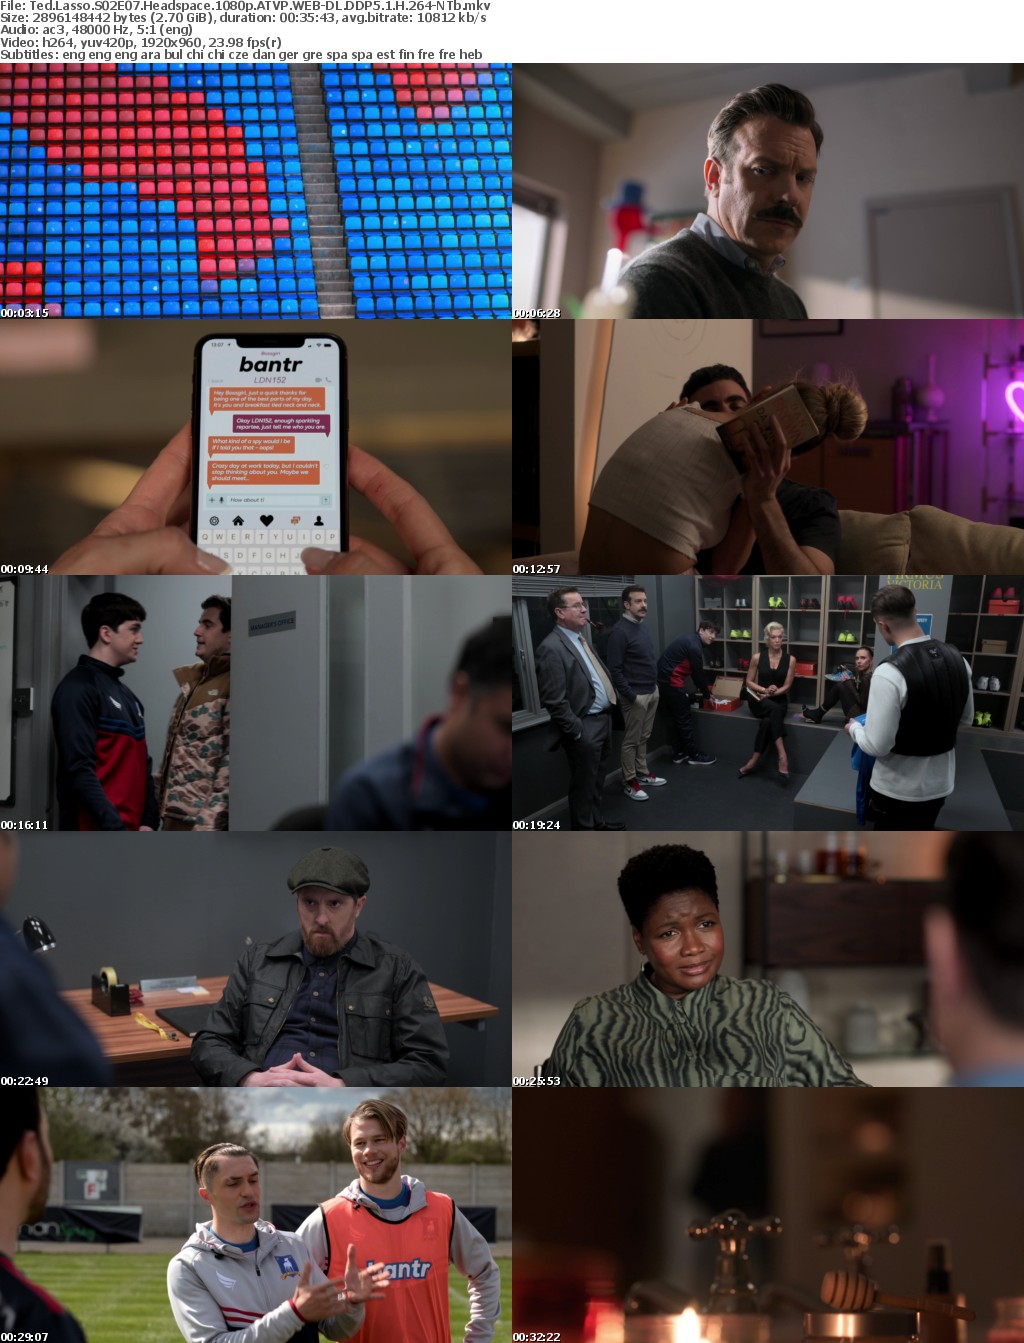 Ted Lasso S02E07 Headspace 1080p ATVP WEBRip DDP5 1 x264-NTb